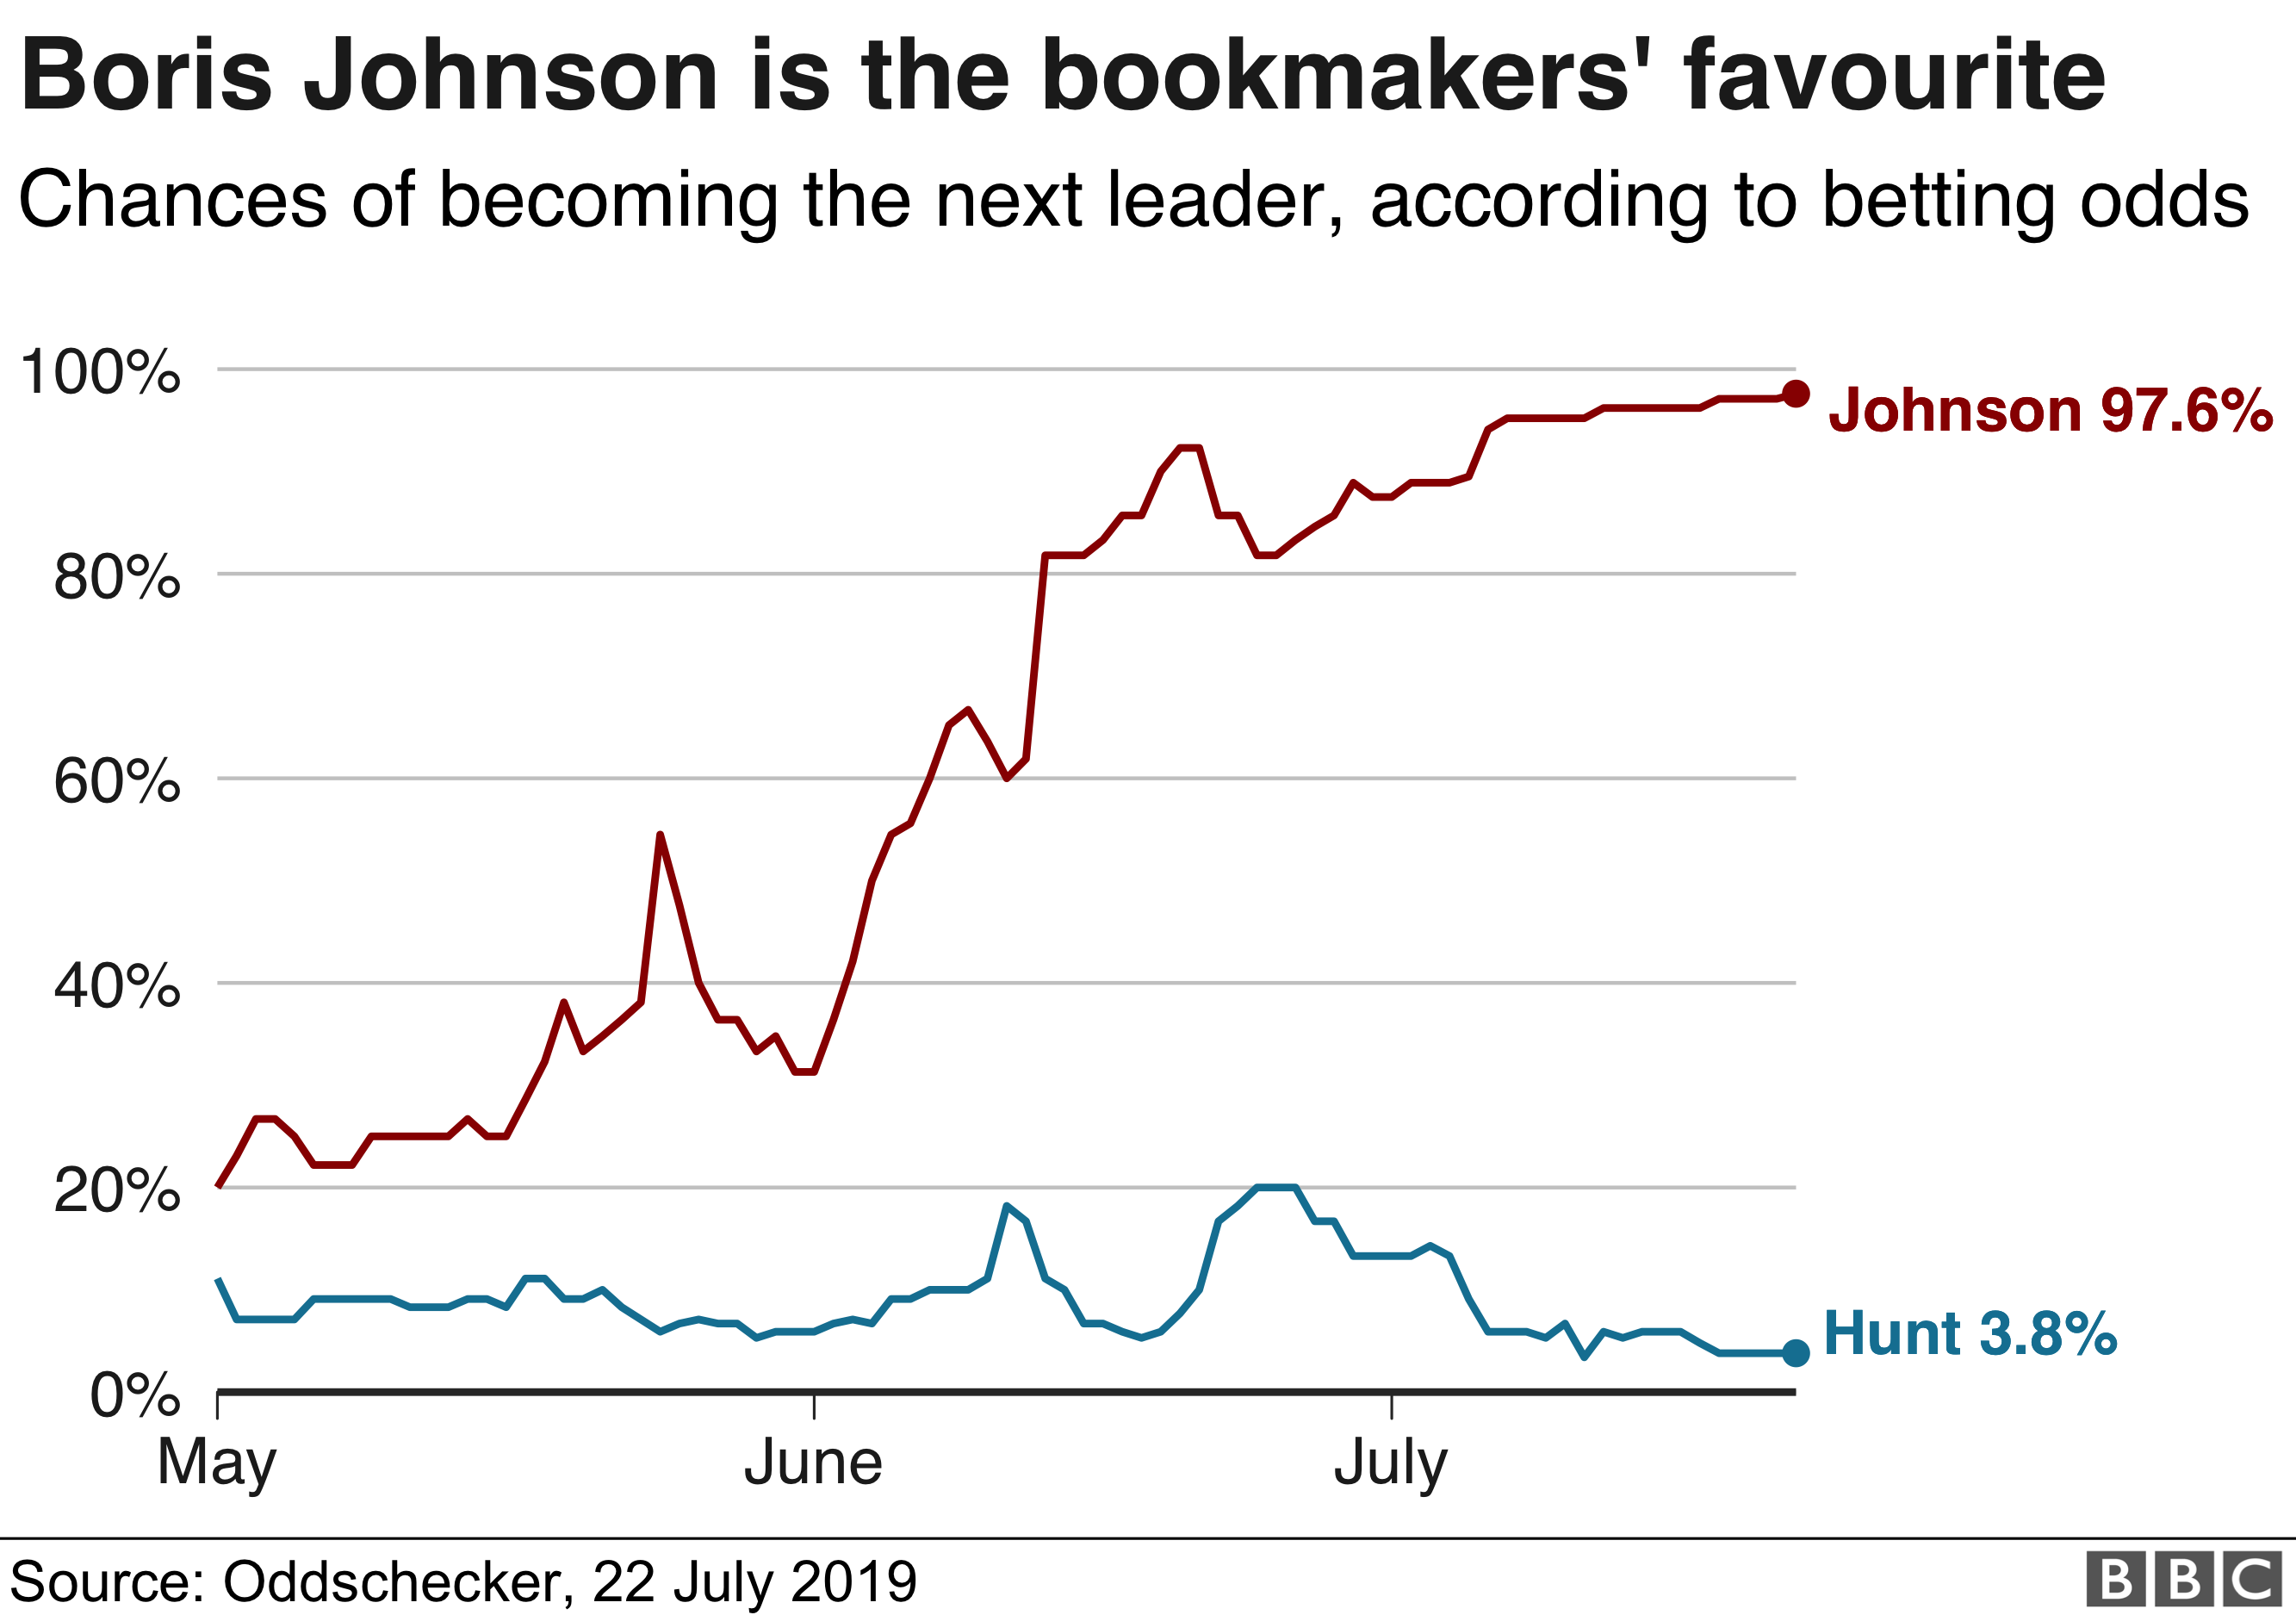 Line chart showing bookmakers' favourite is Boris Johnson on 97.6%, Hunt is on 3.8%